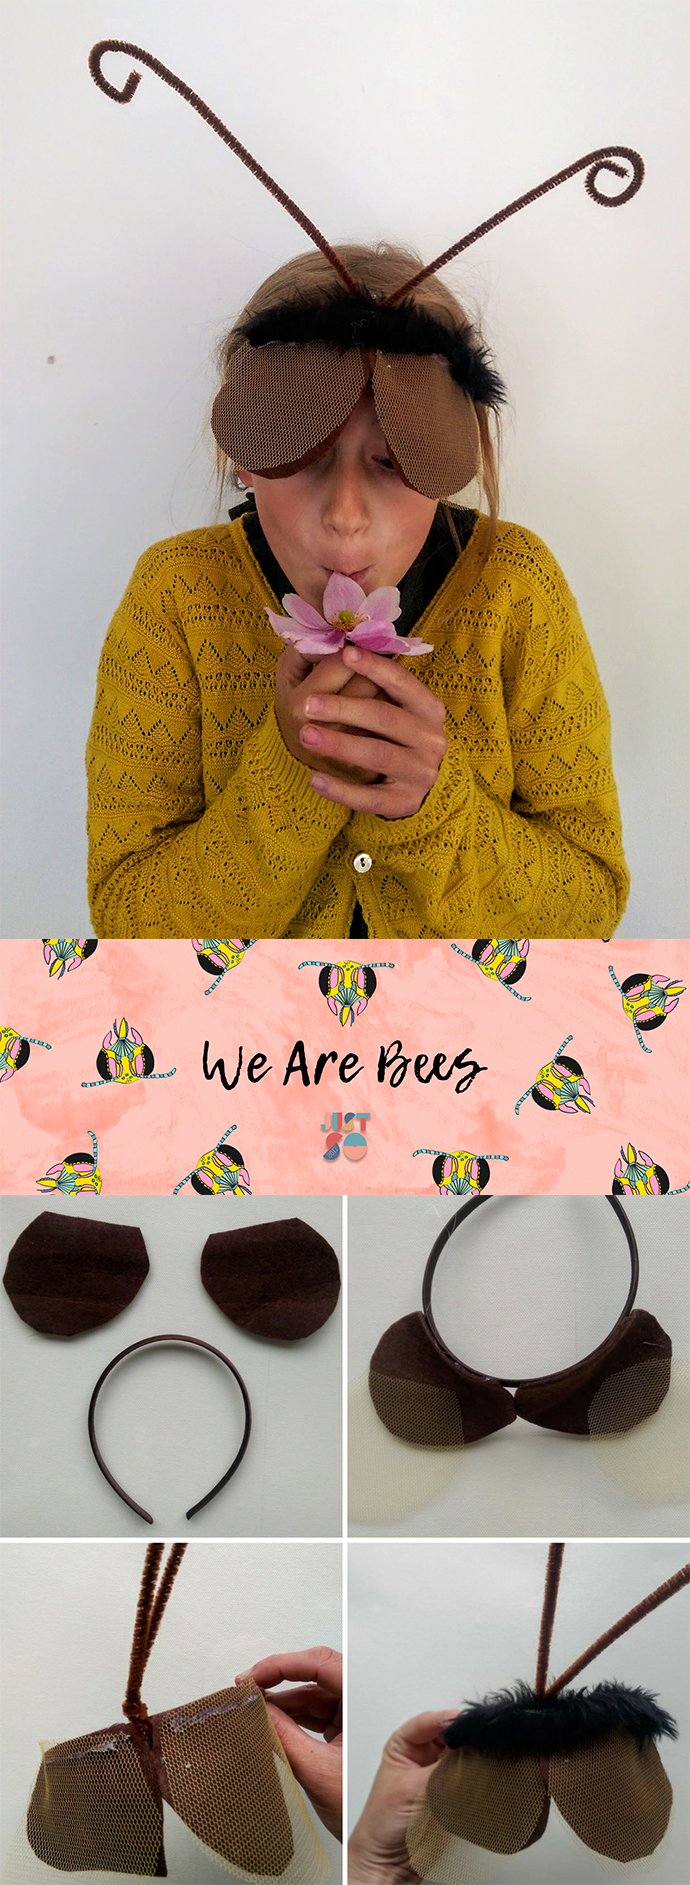 Easy bee costume | Just So Festival 2017